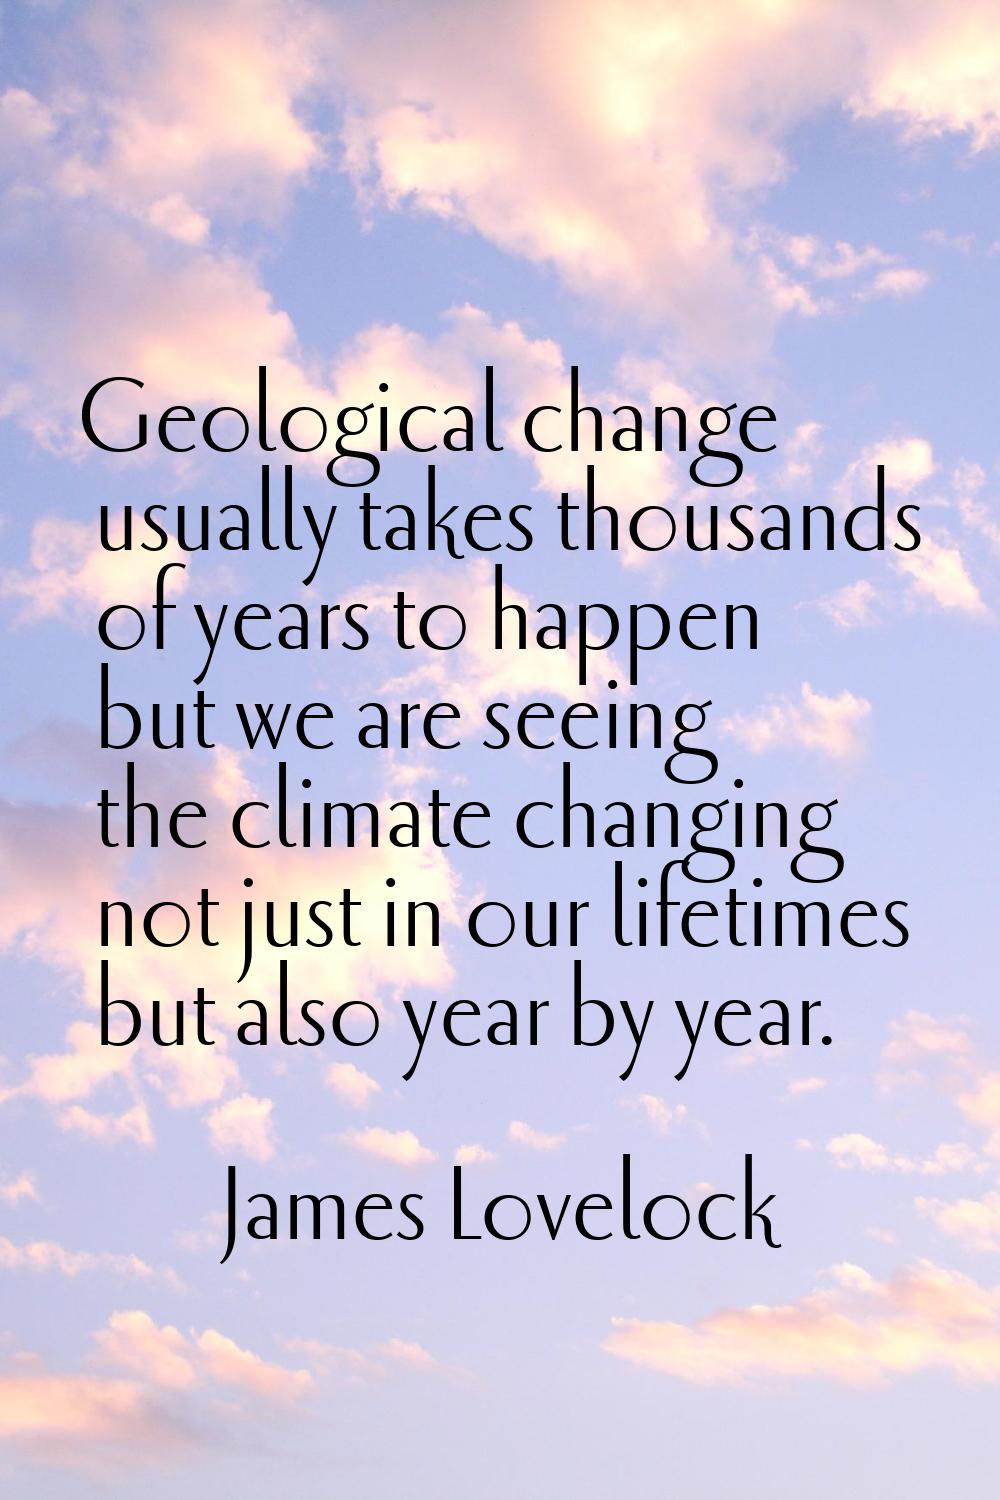 Geological change usually takes thousands of years to happen but we are seeing the climate changing